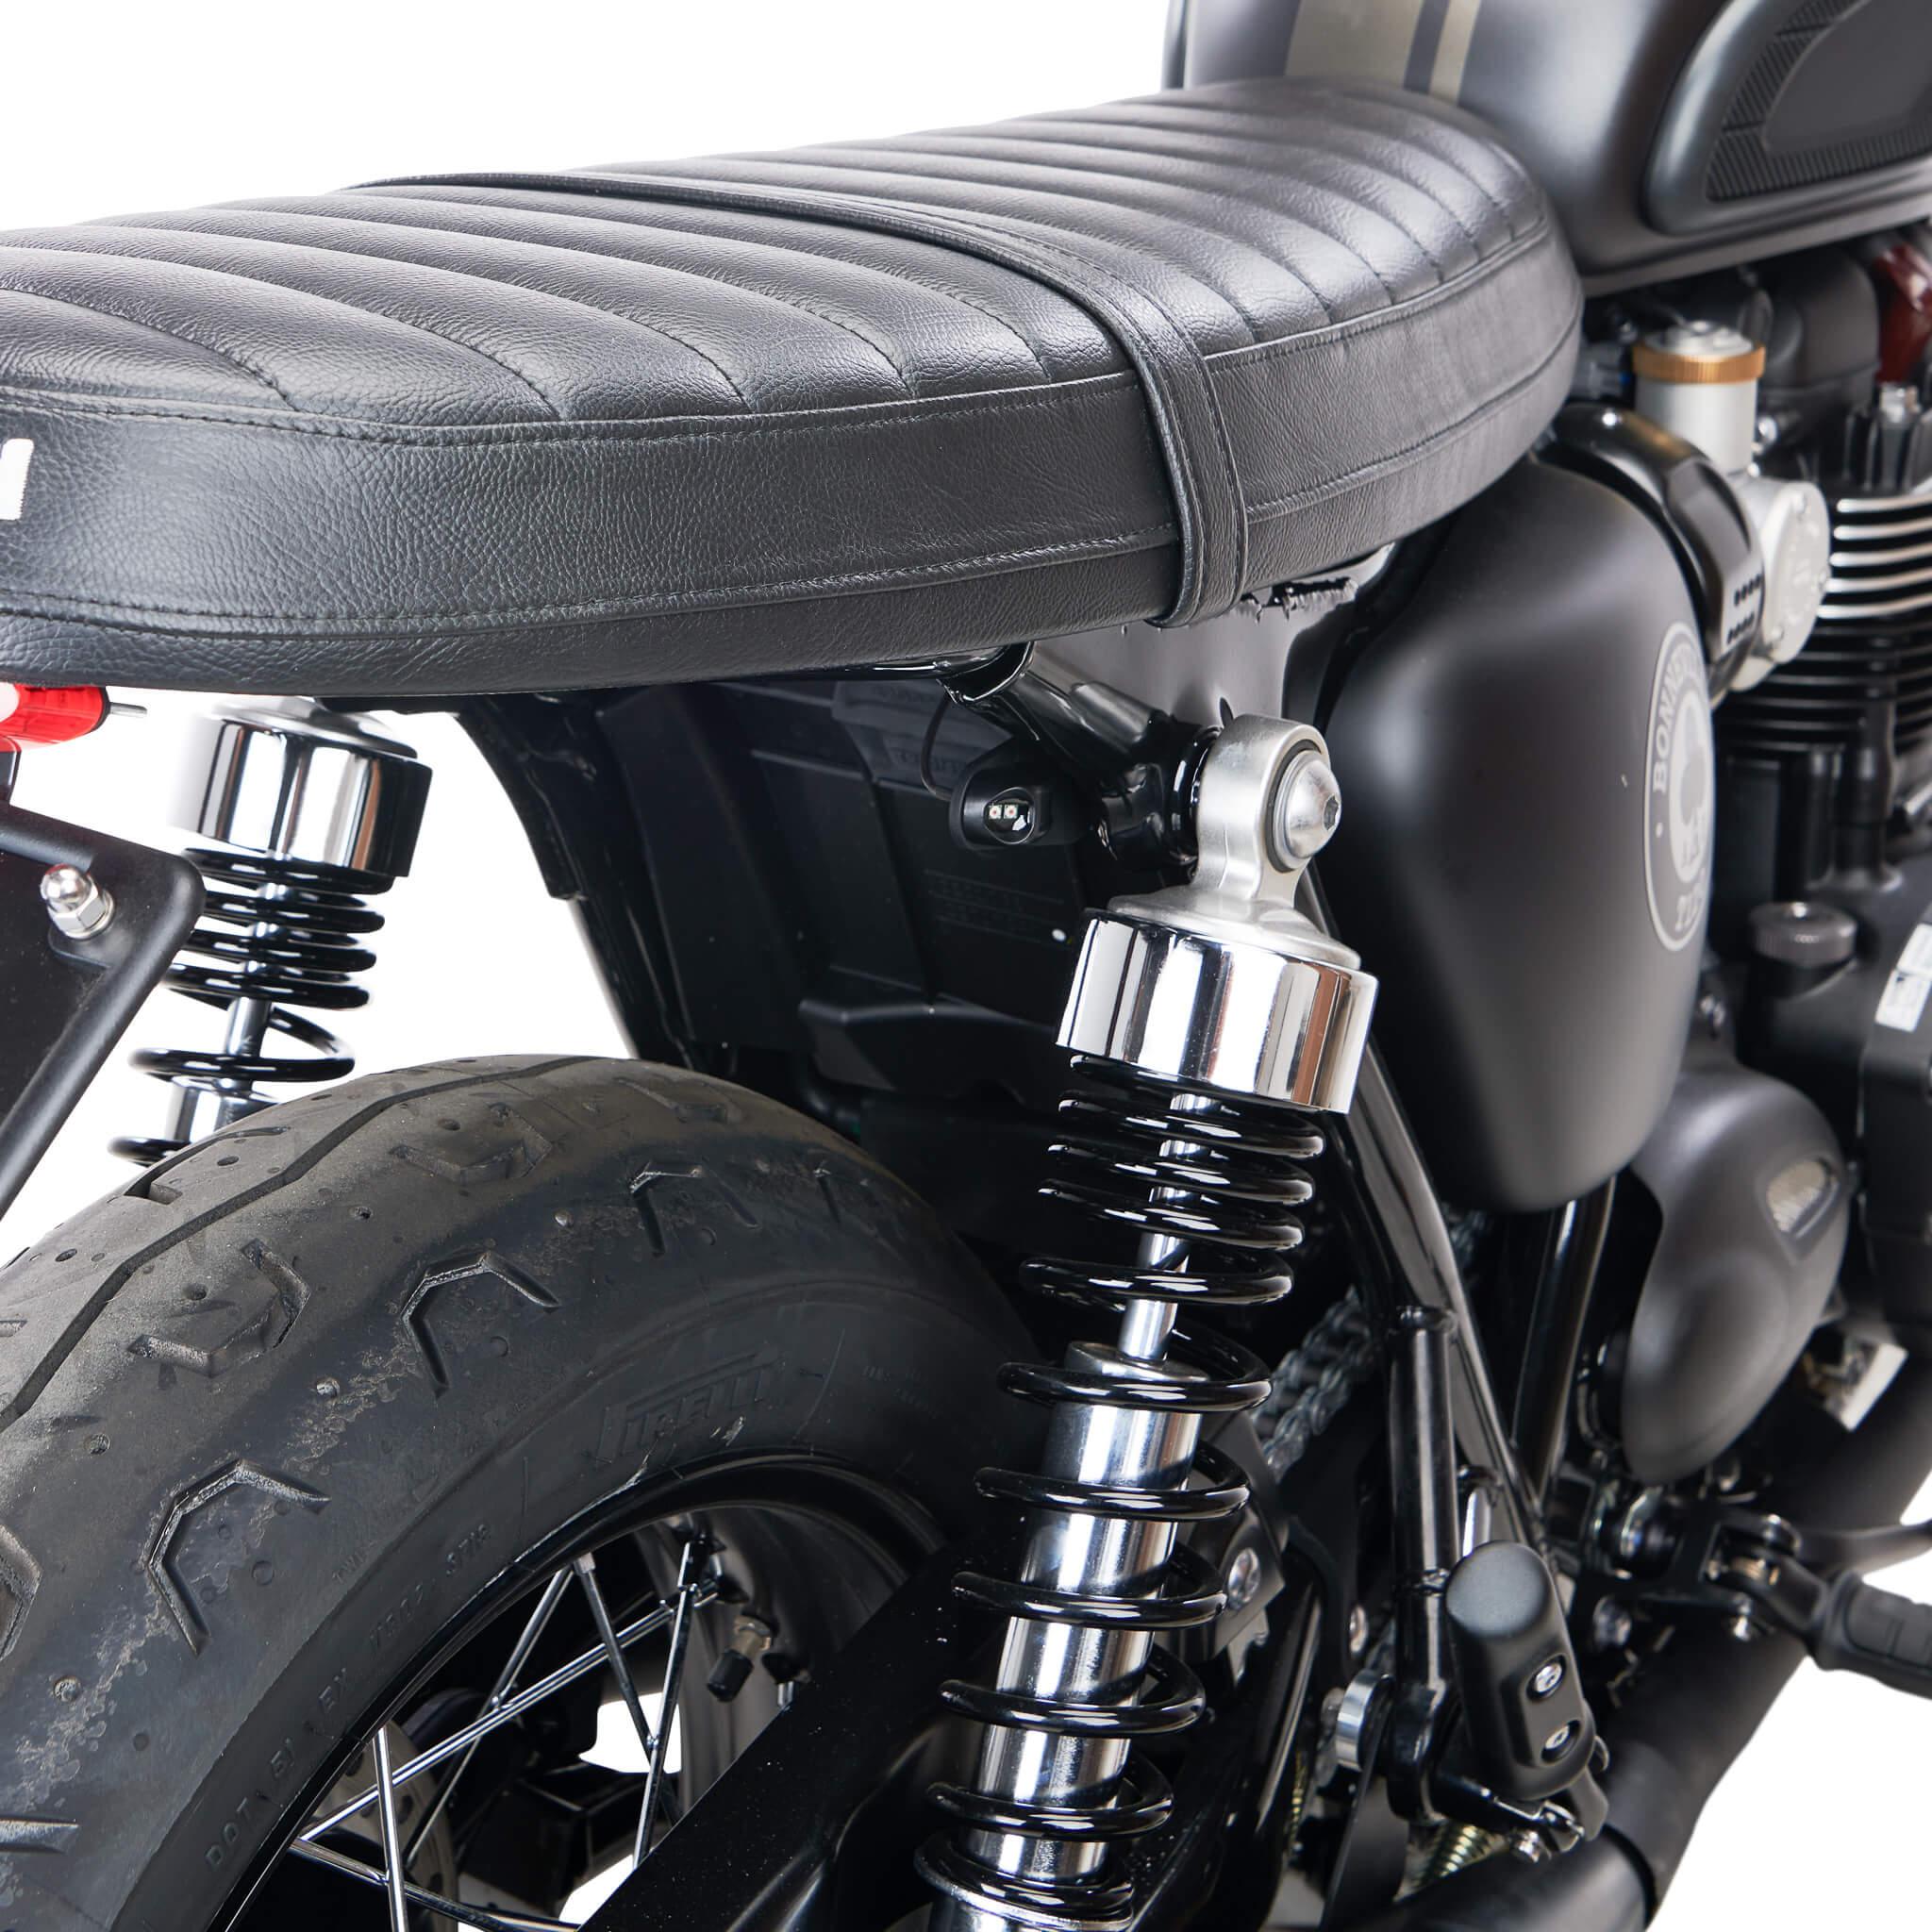 Shock Mount Turn Signal Adapters for Triumph Motorcycles - British Customs